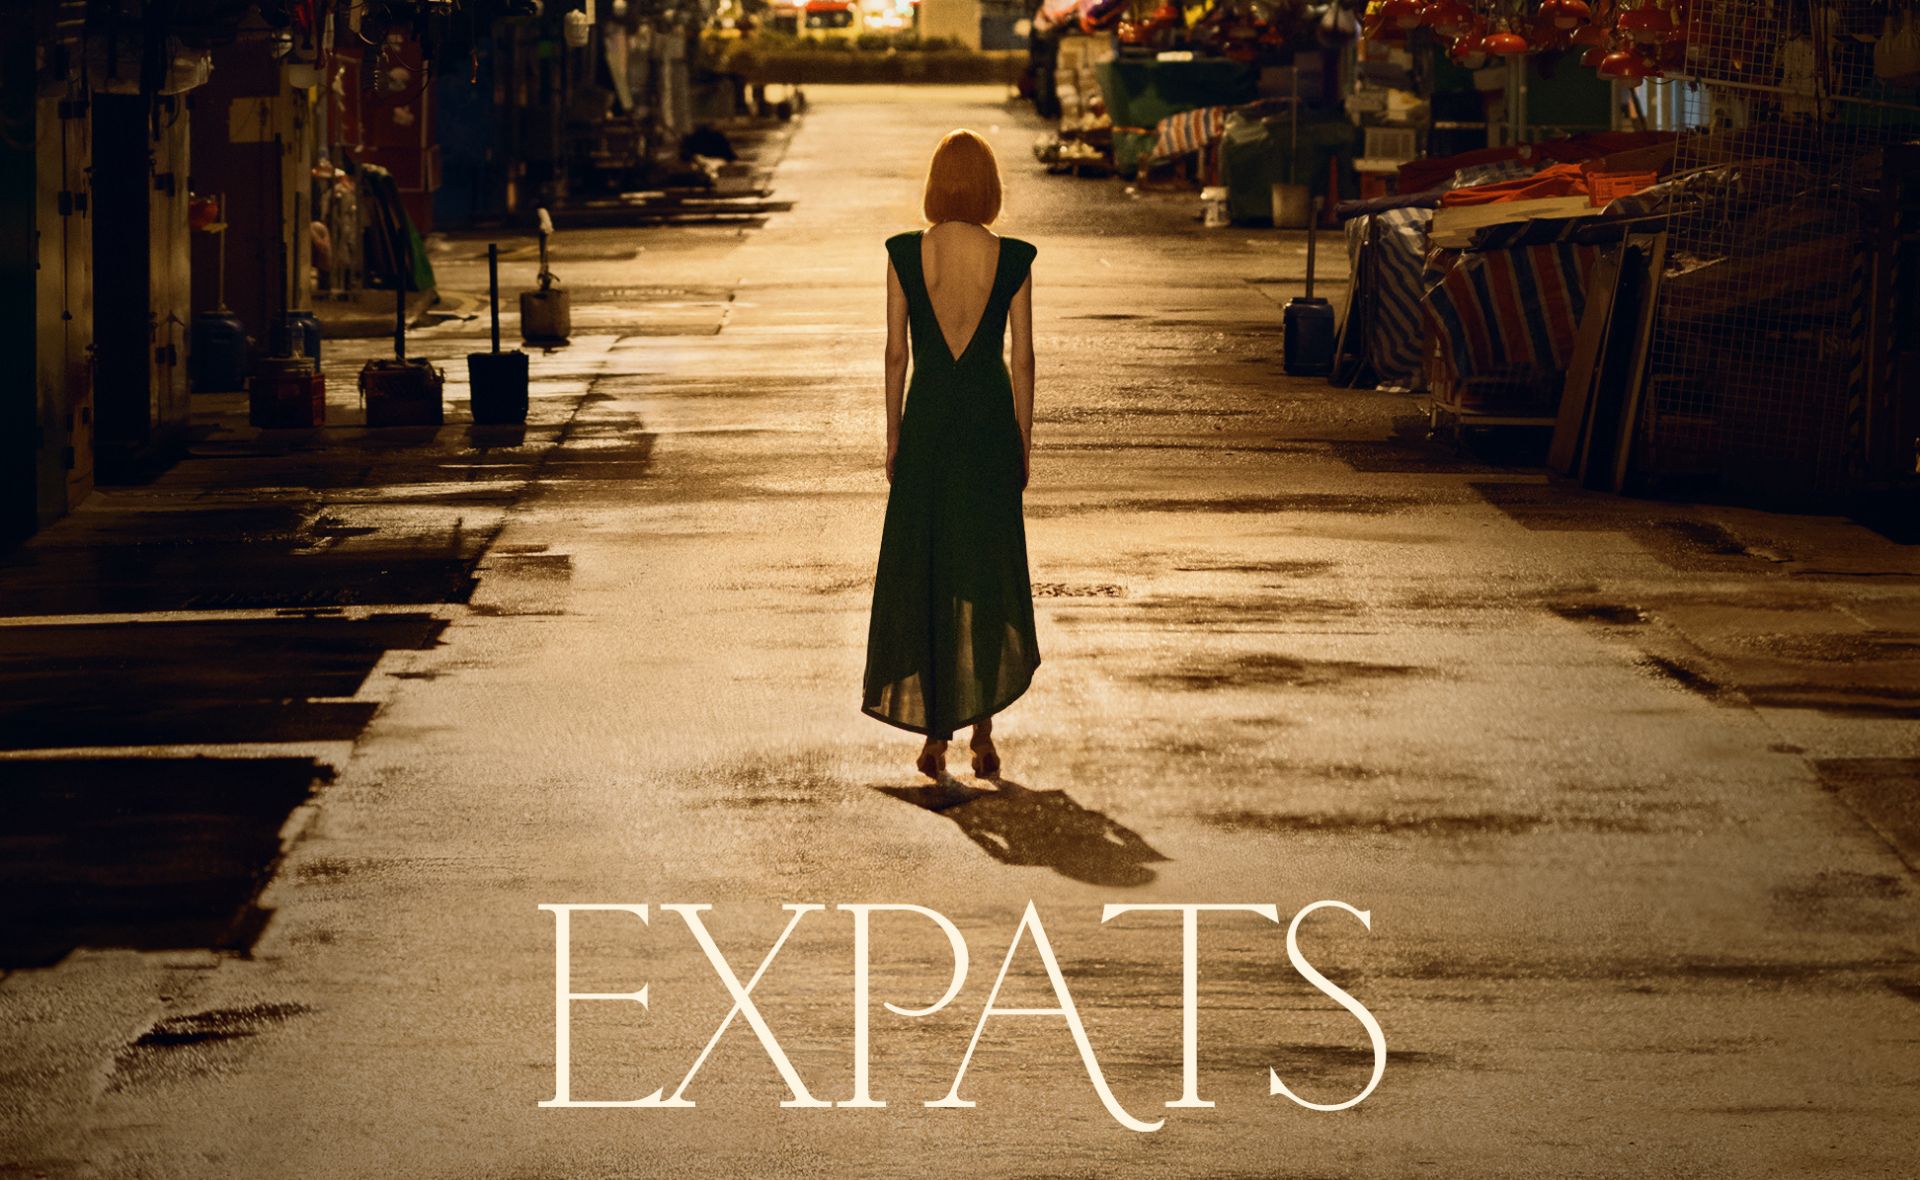 Nicole Kidman leads the cast of ‘Expats’ in this rich story about life in Hong Kong